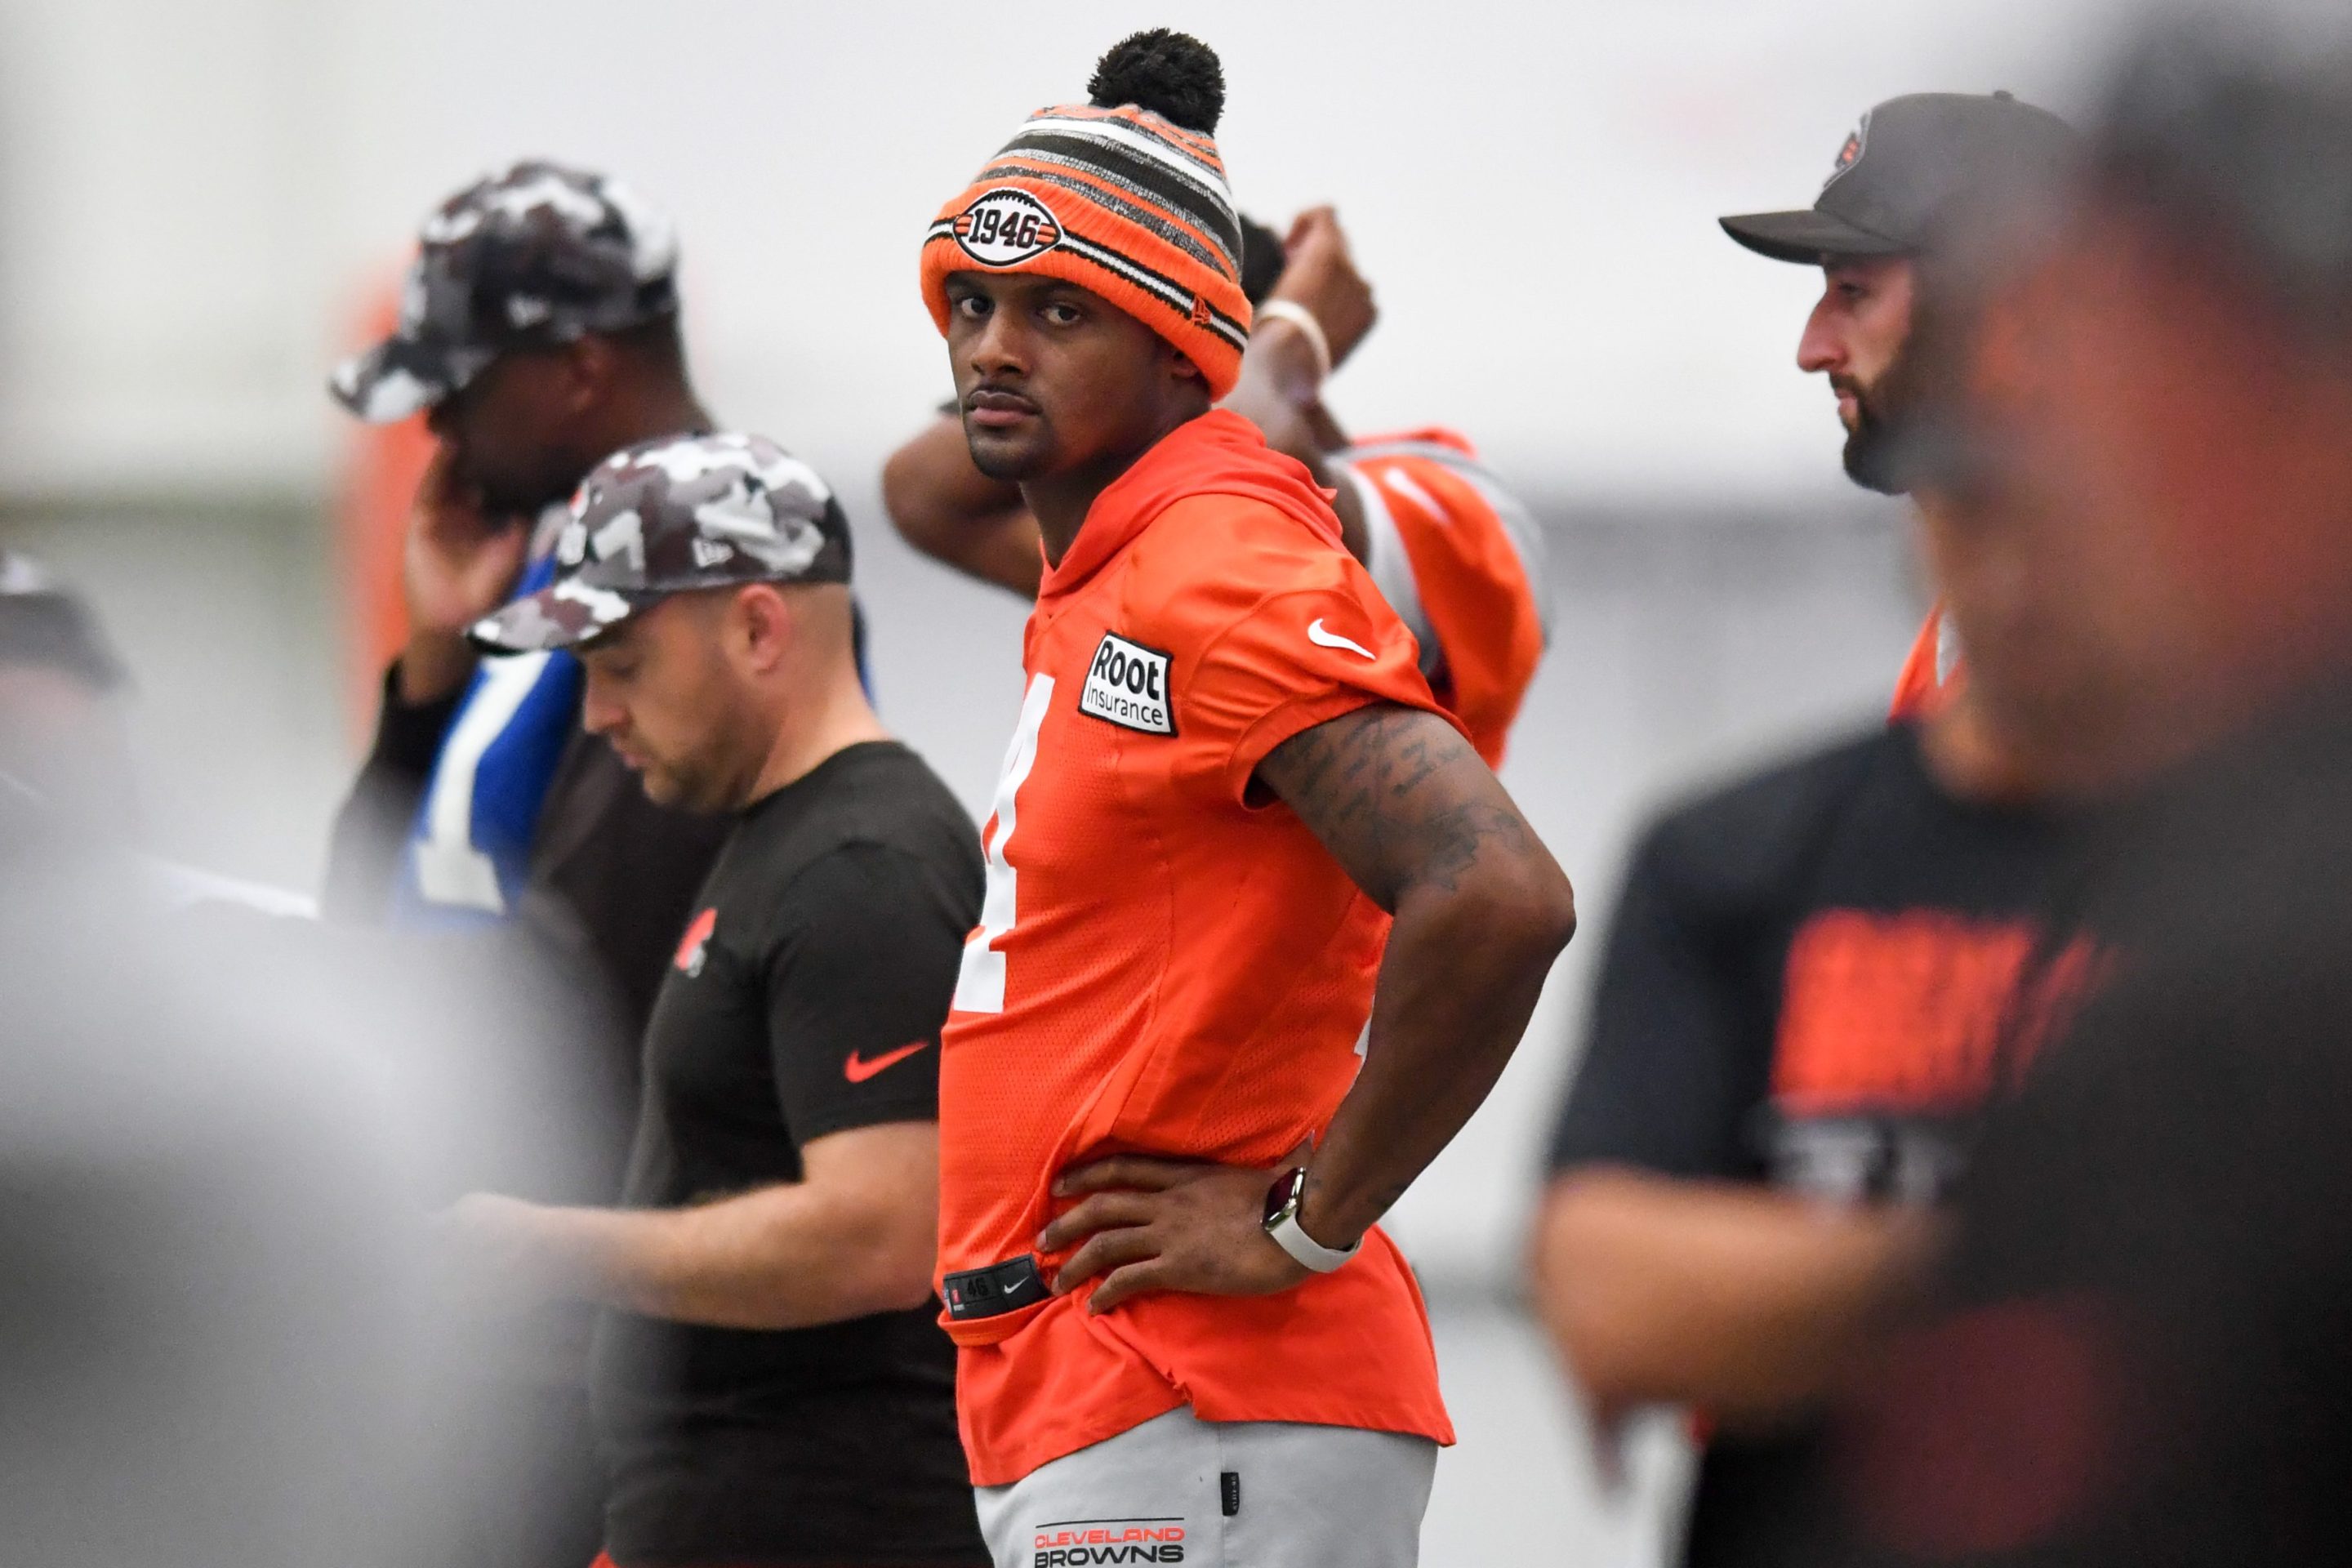 Deshaun Watson #4 of the Cleveland Browns looks on during Cleveland Browns training camp at CrossCountry Mortgage Campus on July 27, 2022 in Berea, Ohio.